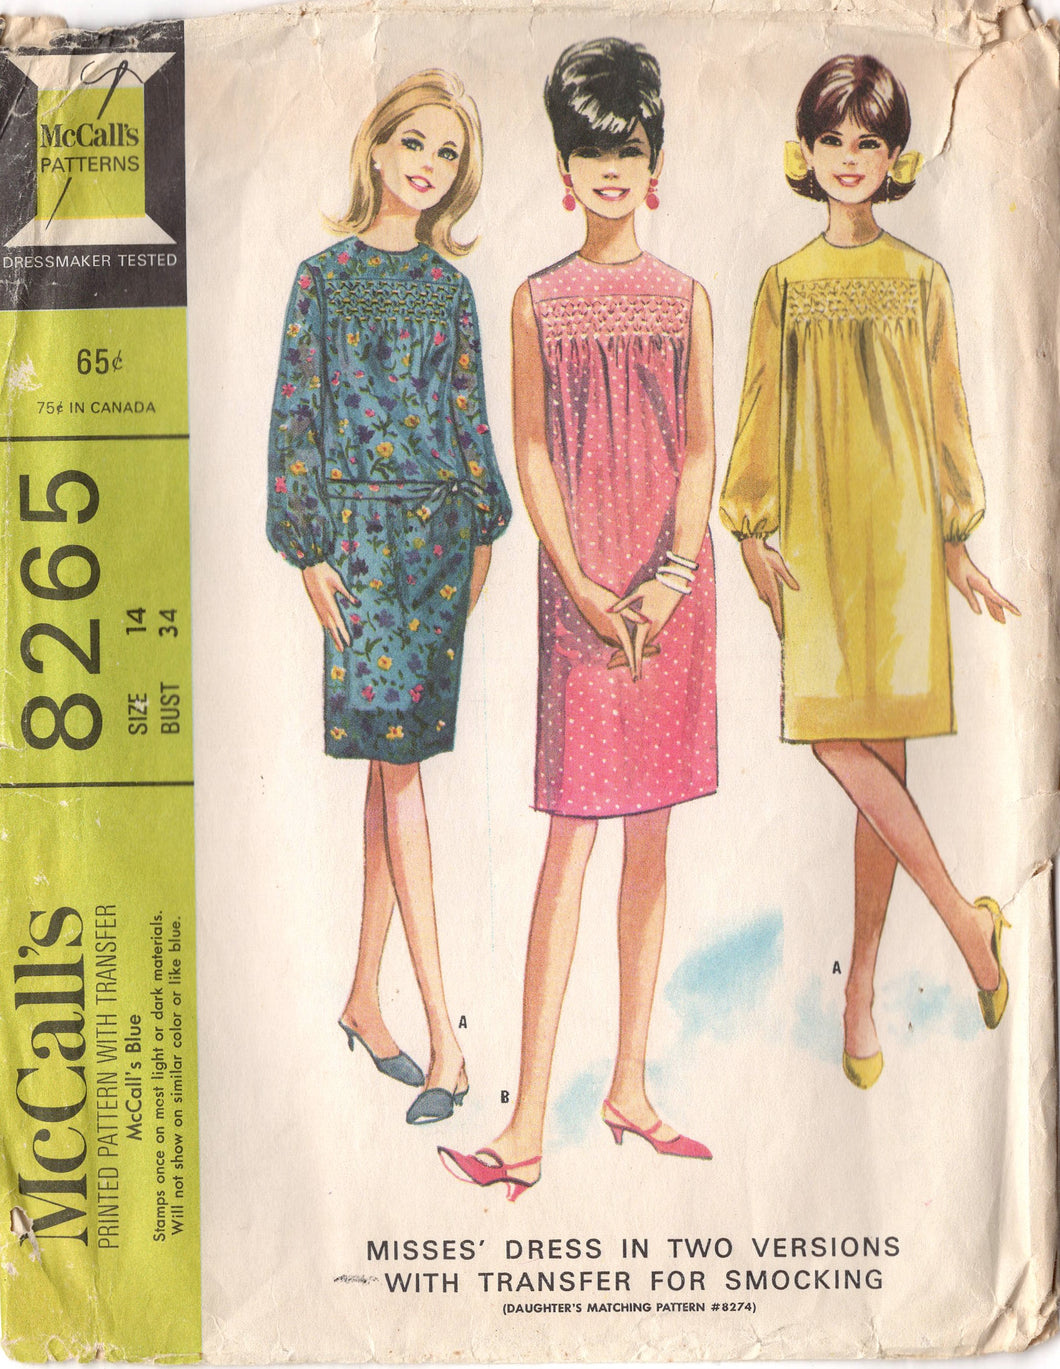 1960's McCall's One Piece Sheath Dress Pattern with Smocked Top - Bust 34